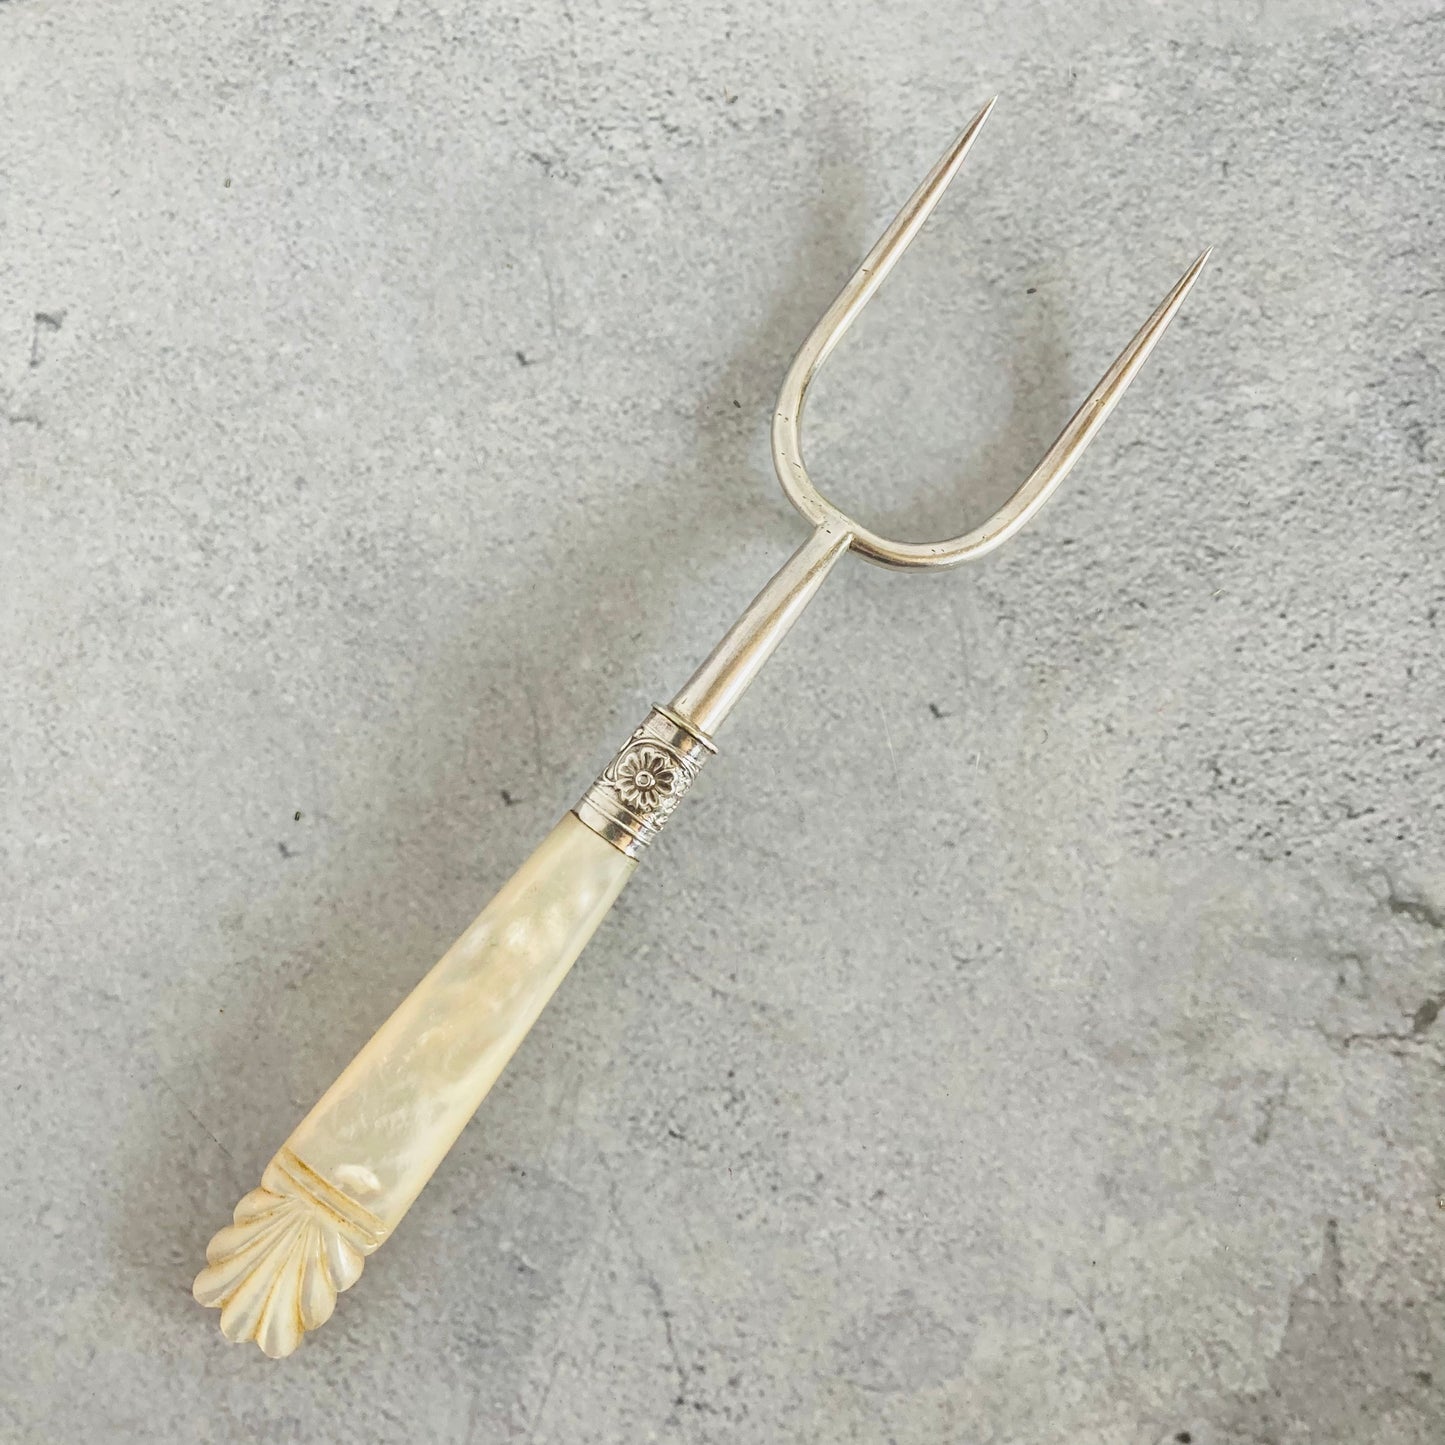 The Headhunter Hans - Antique Two Prong Bread Fork